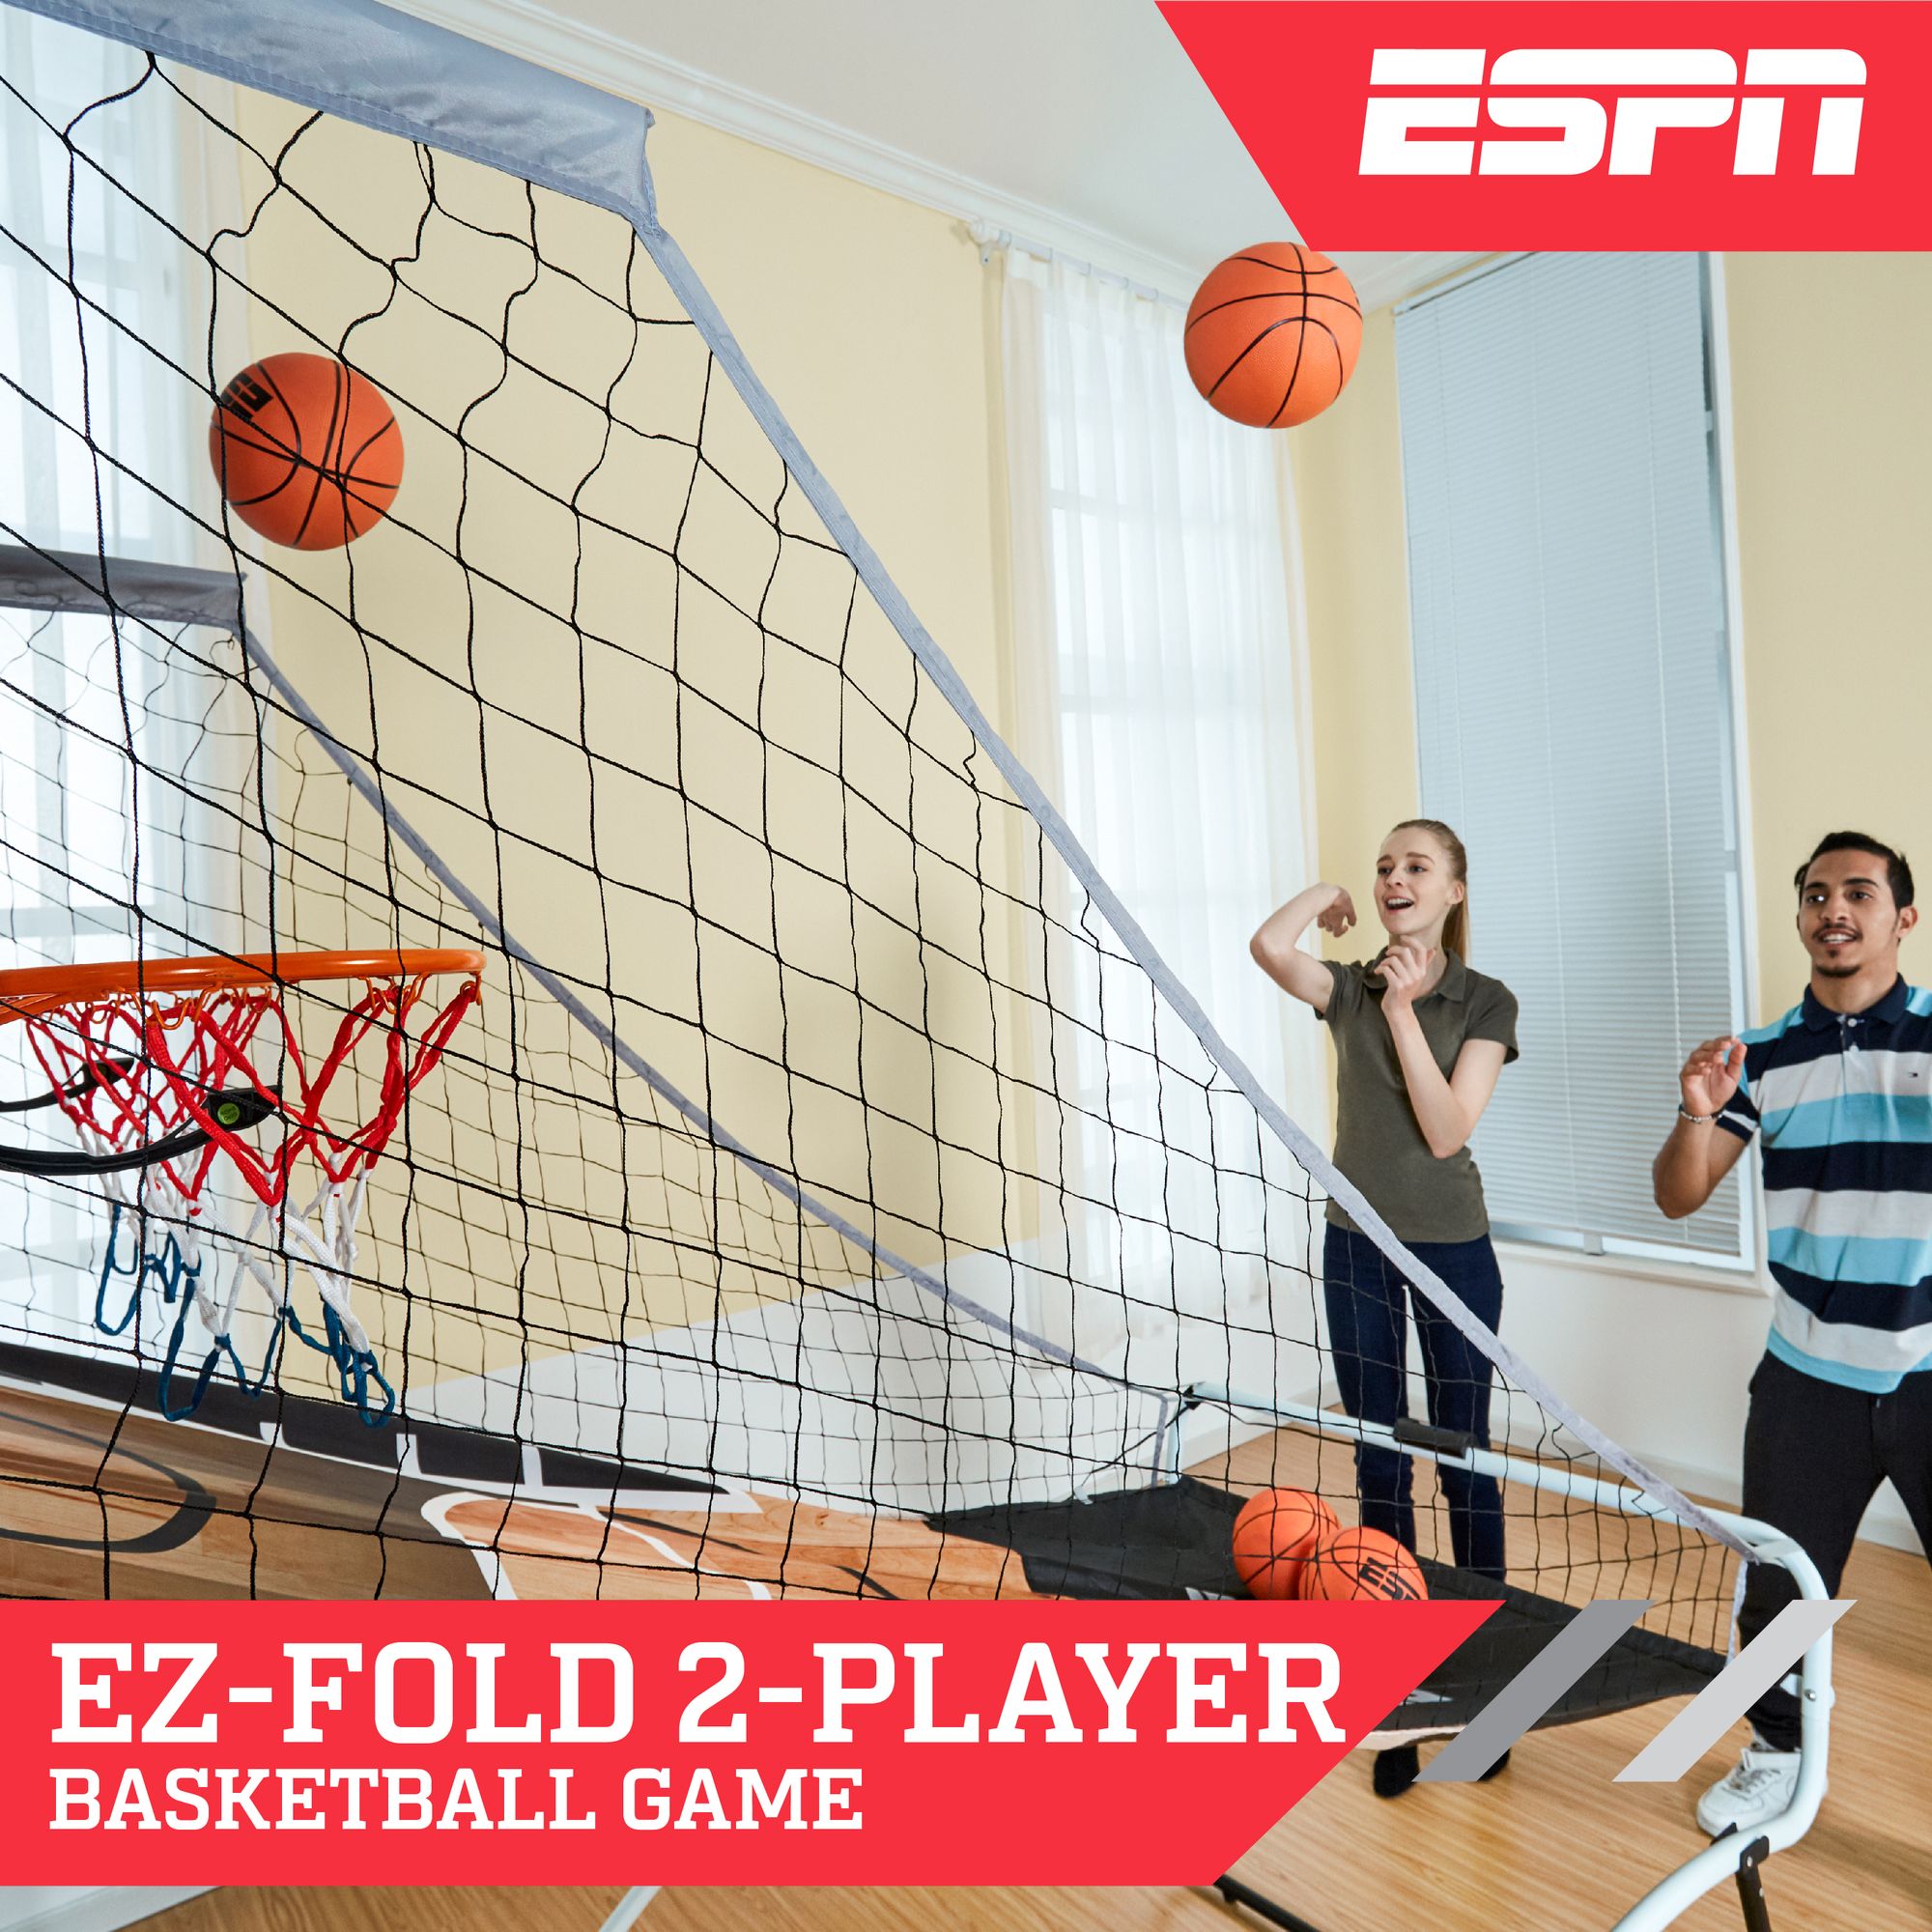 ESPN 81 inch 2-Player Foldable Arcade Basketball Game - image 3 of 11